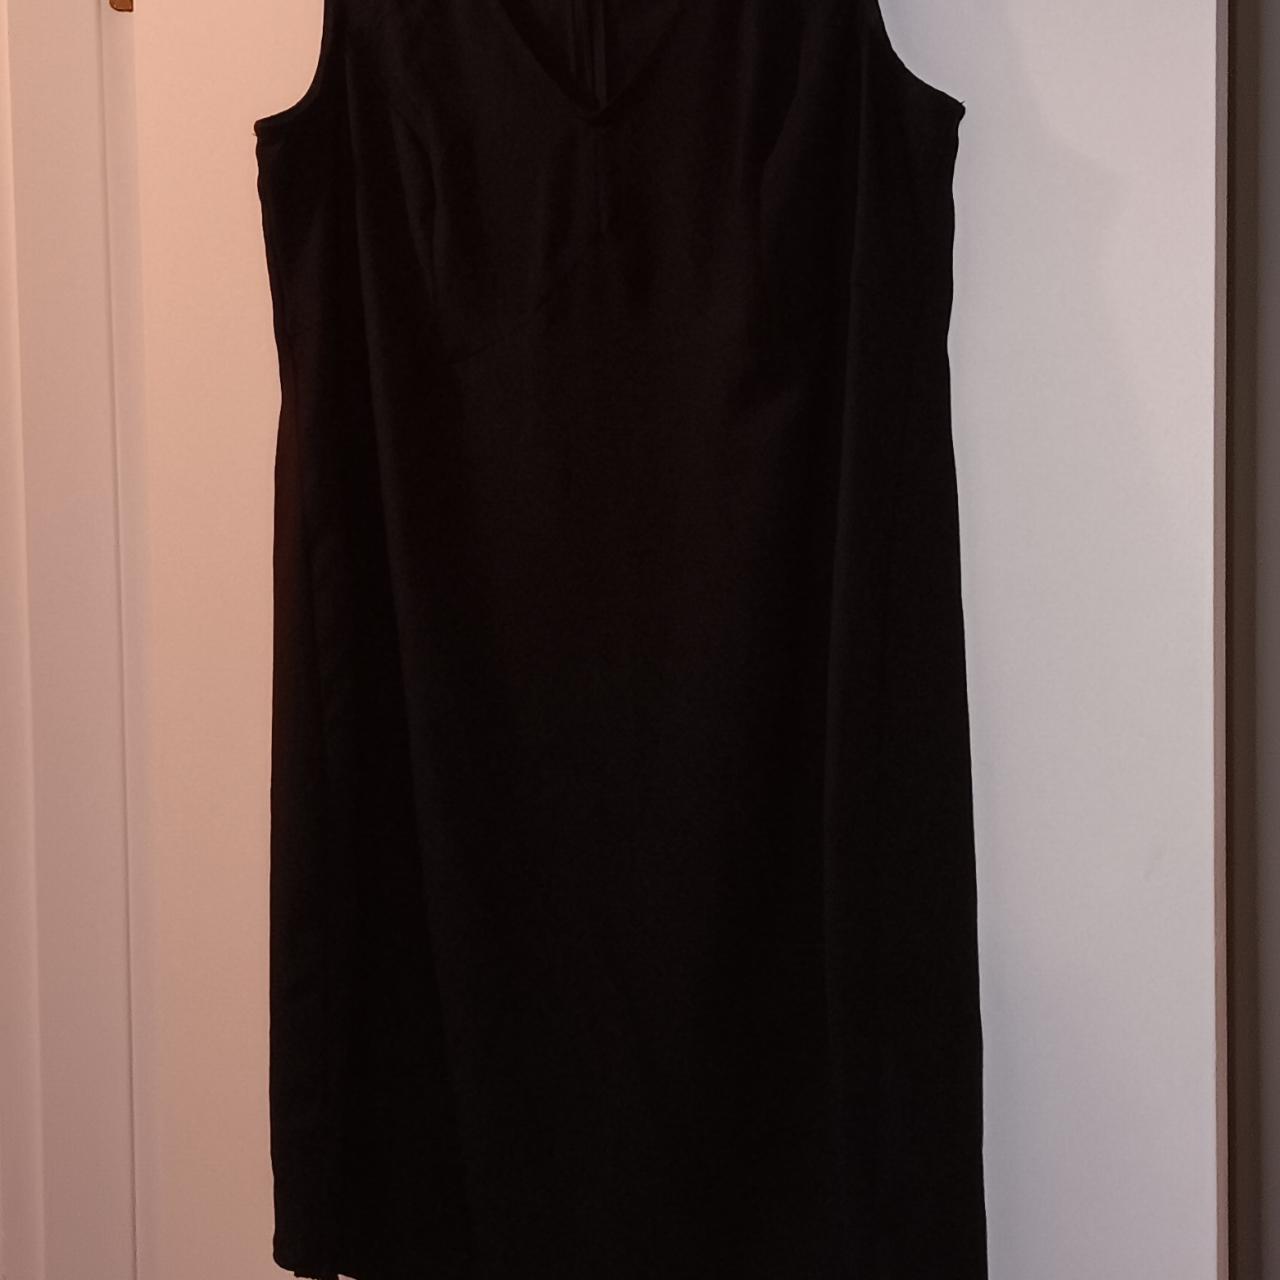 ABS Black Cocktail Dress. Size 16W. New Without Tags. - Depop